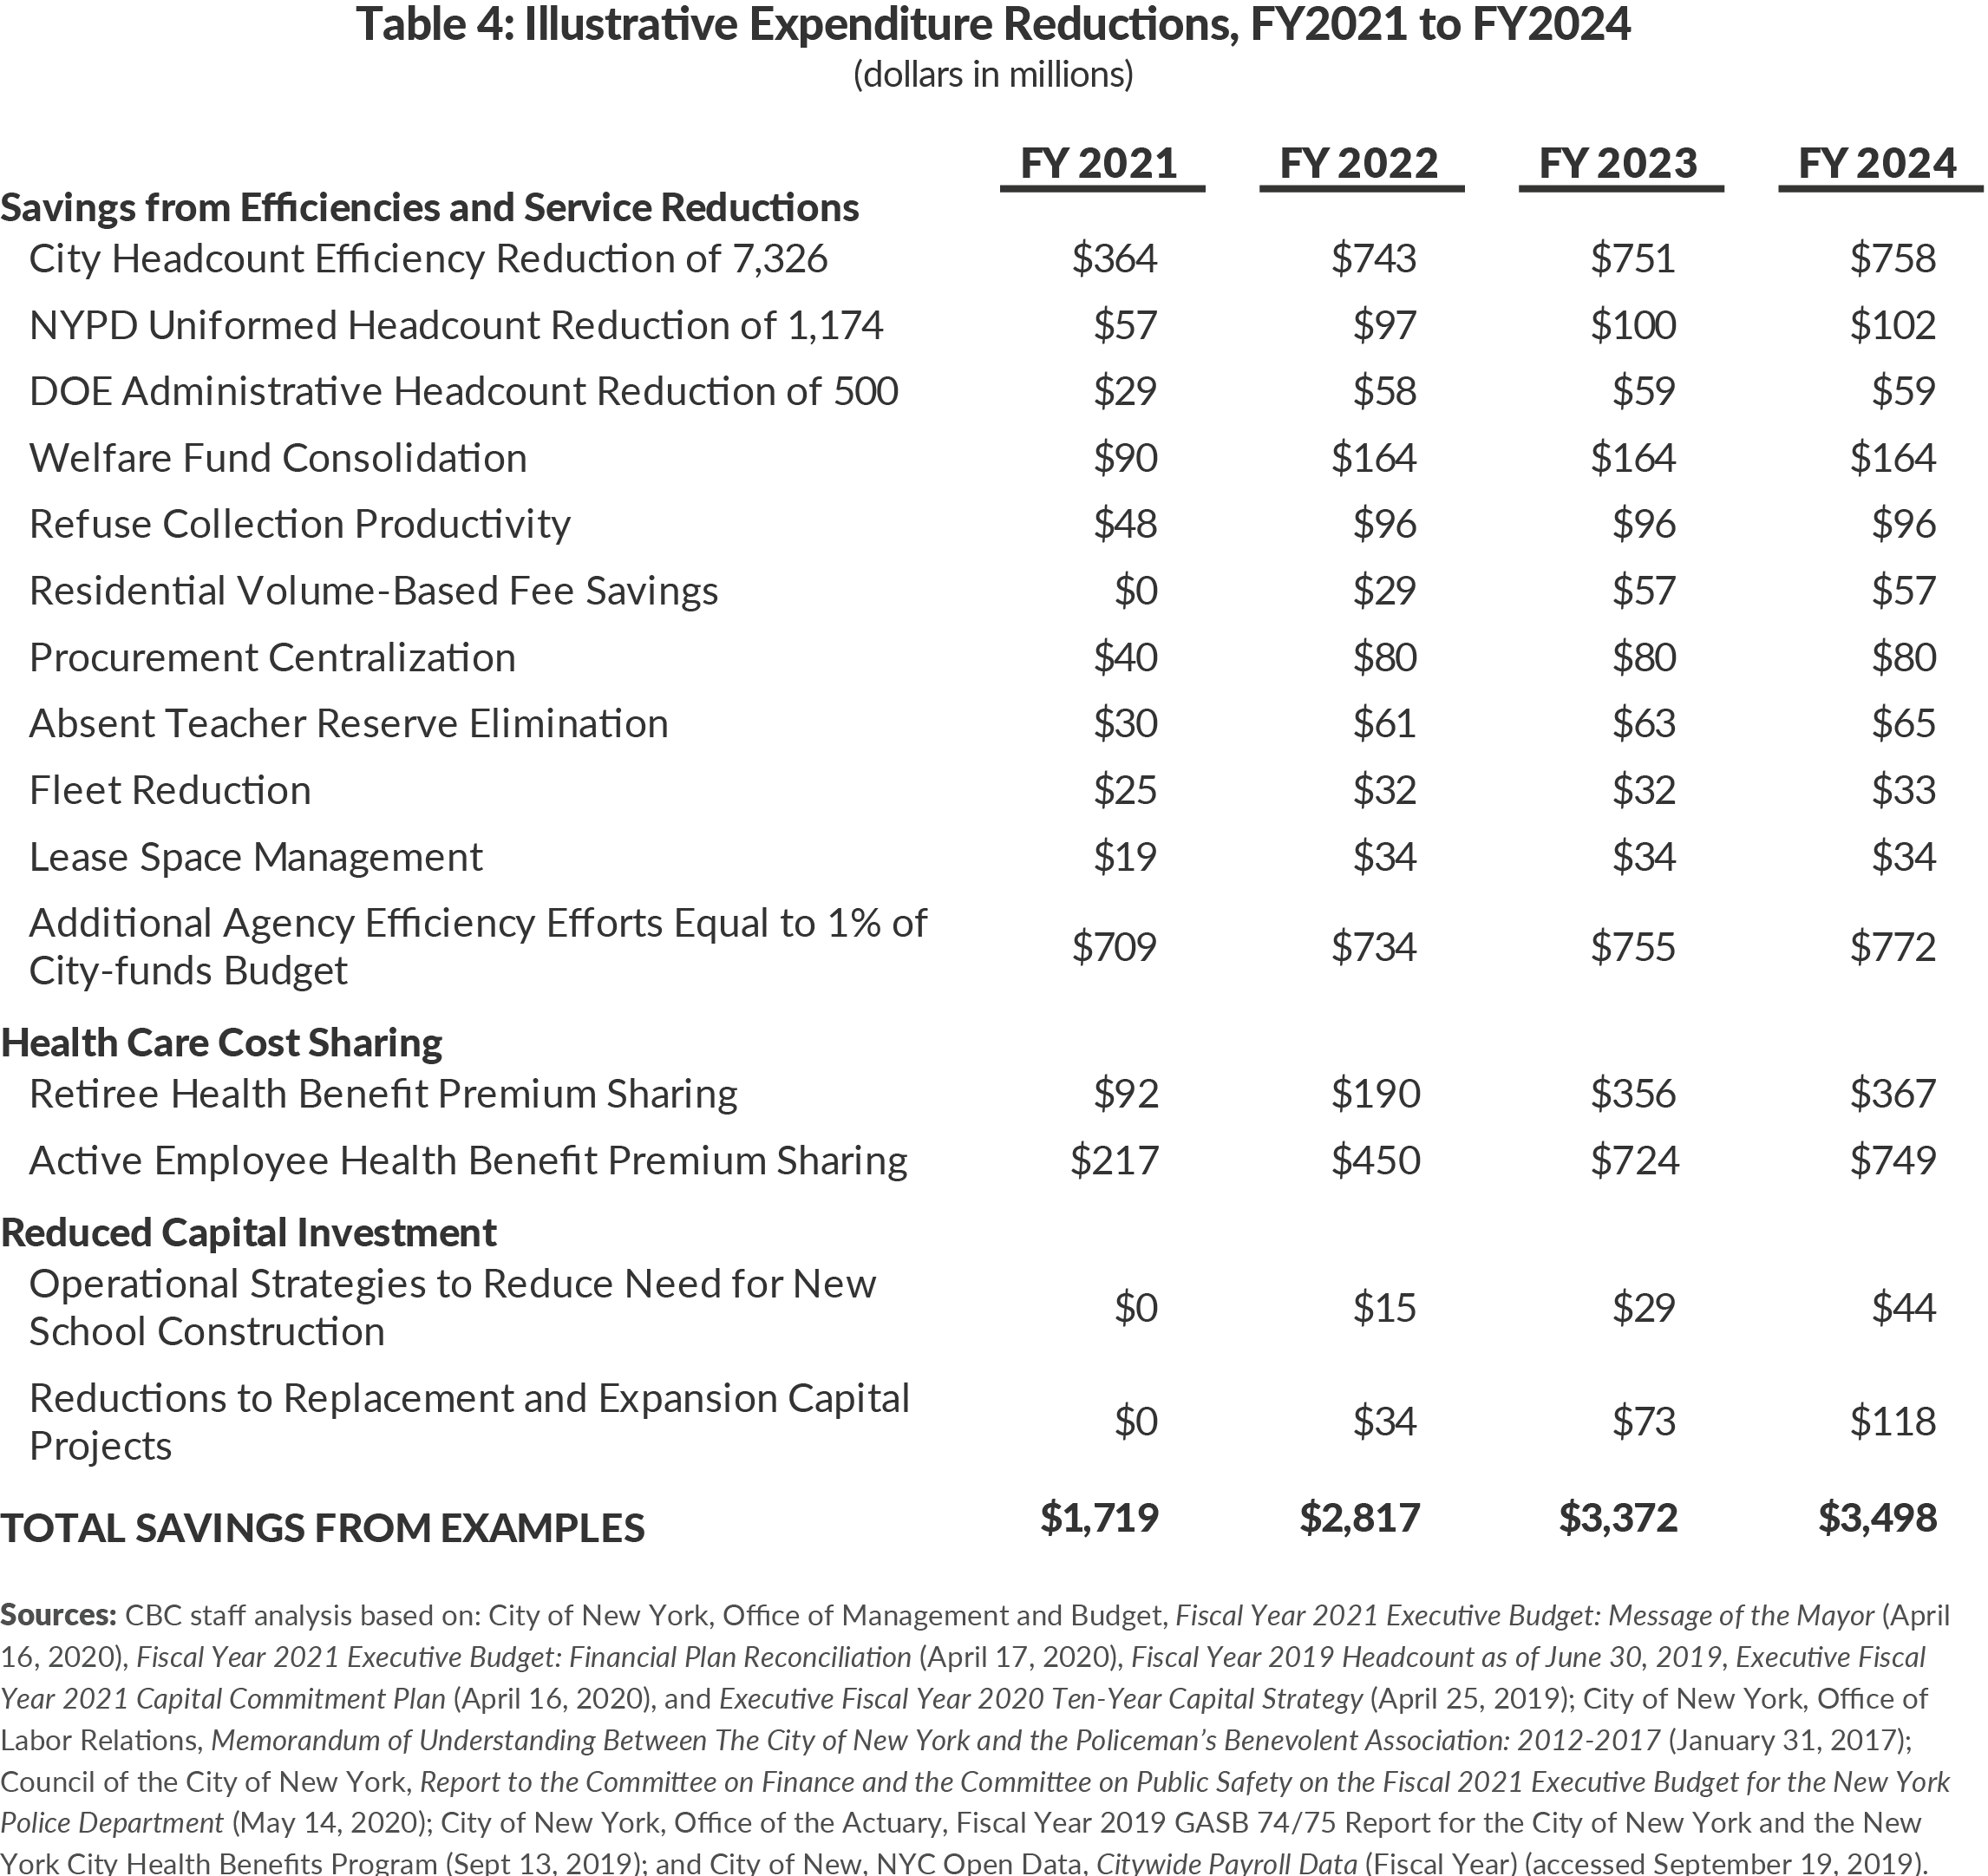 Table 4: Illustrative Expenditure Reductions, FY2021 to FY2024